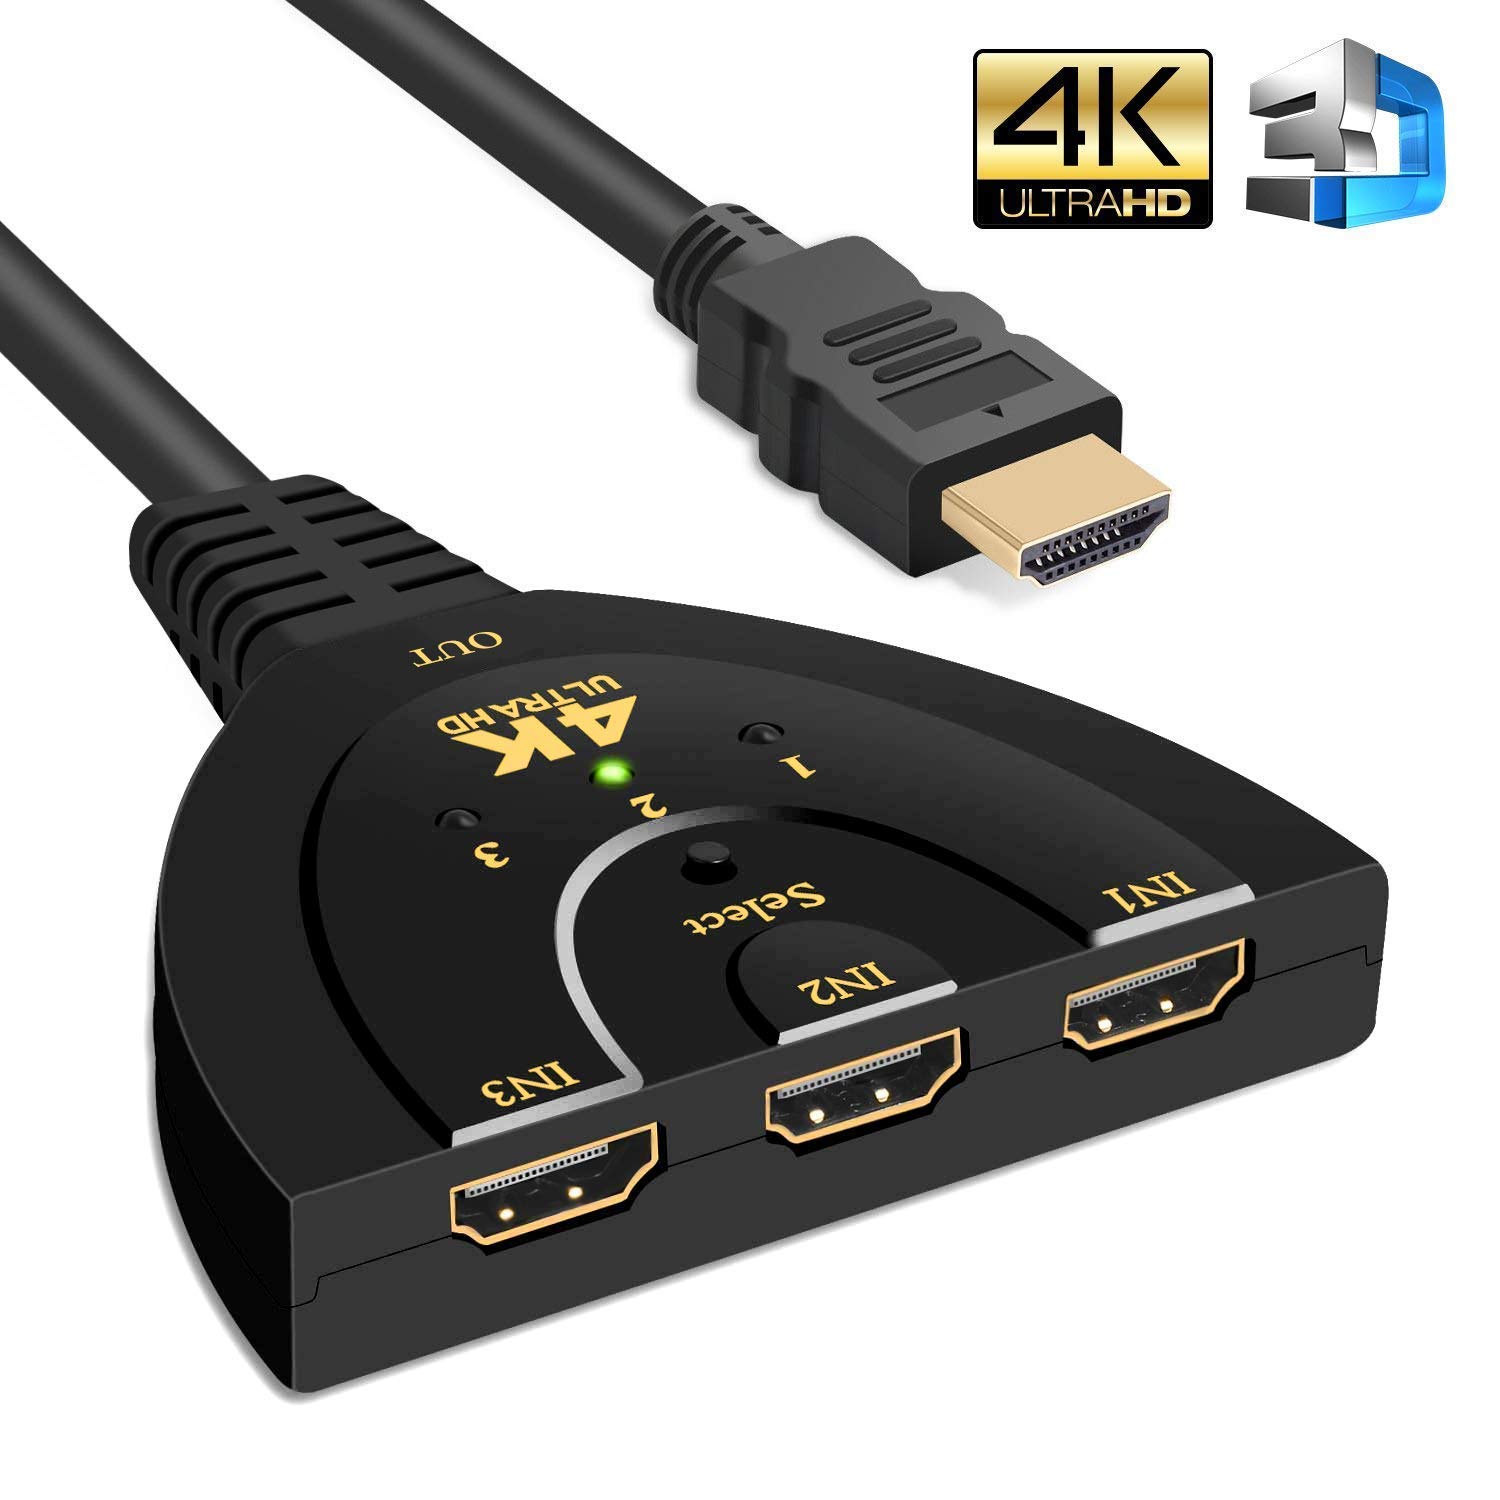 Technotech 3 Port 4K HDMI Switch 3x1 Switch Splitter with Pigtail Cable